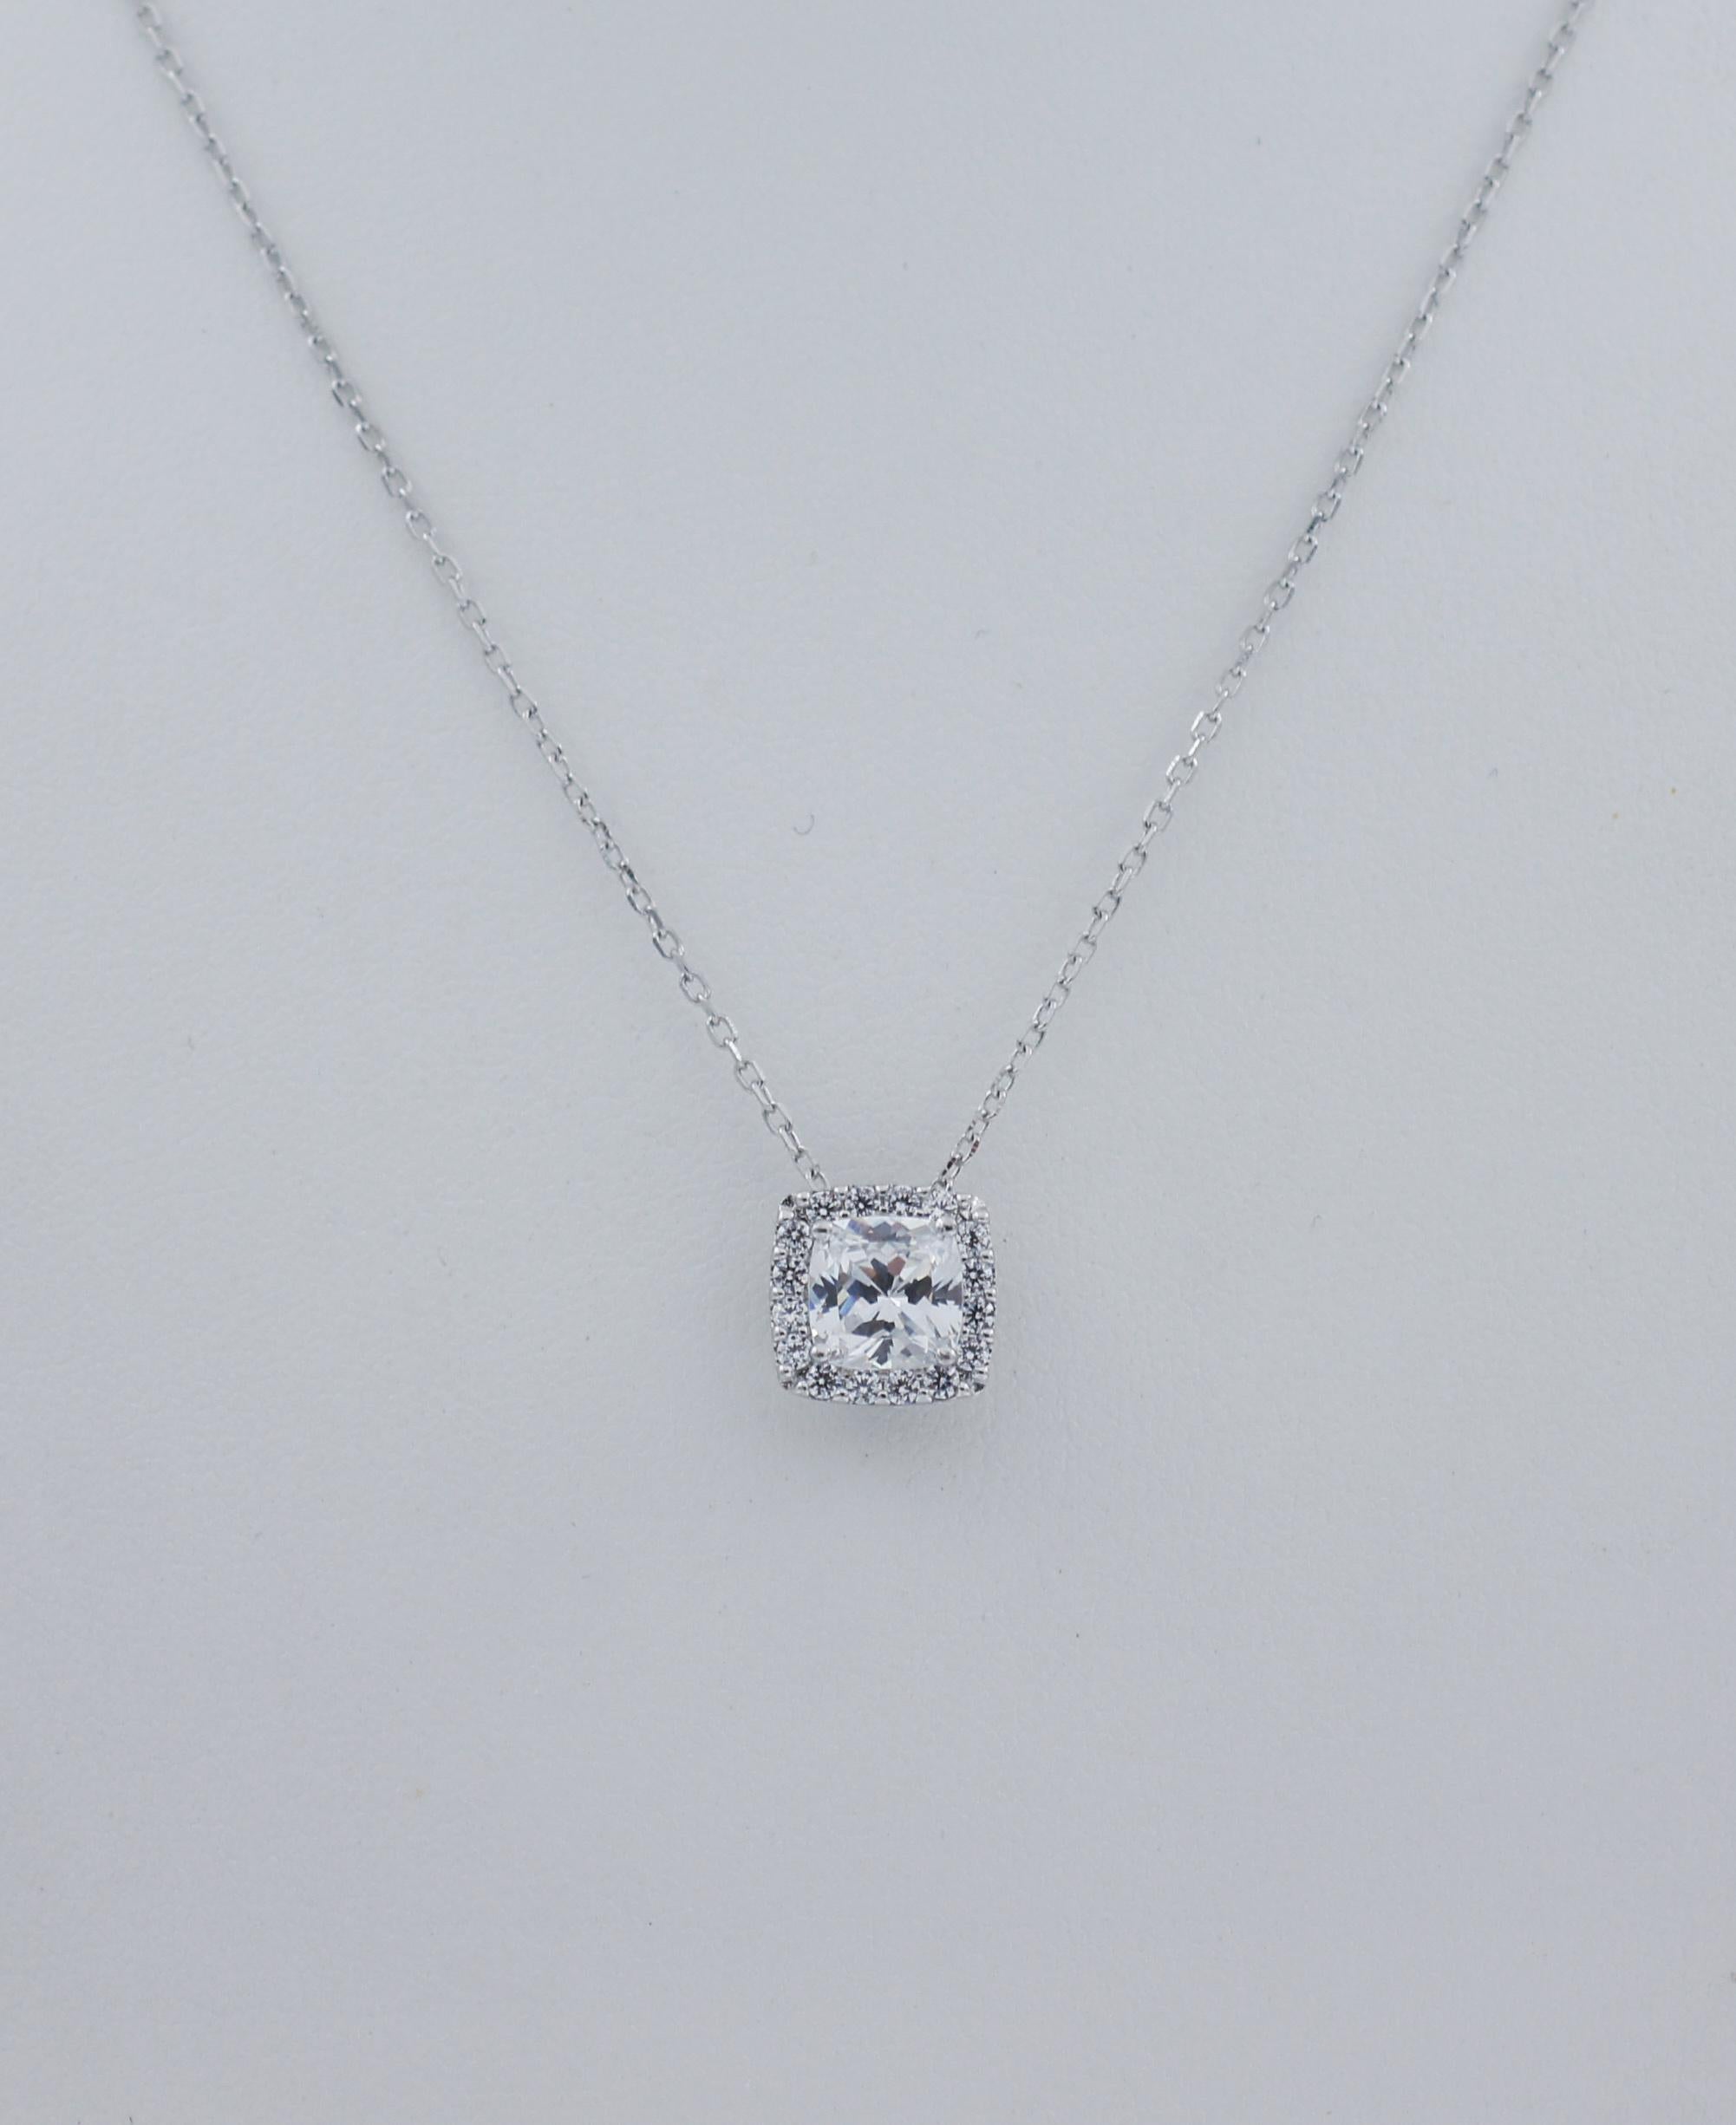 Tacori 
Sterling Silver 925 
CZ Epiphany Necklace
The necklace is crafted of sterling silver and fastens with a spring ring clasp.
Brand: Tacori
Color: White
Stone: Cubic zirconia
Largest stone approx. measurements: 8 mm wide x 8 mm long
Metal: